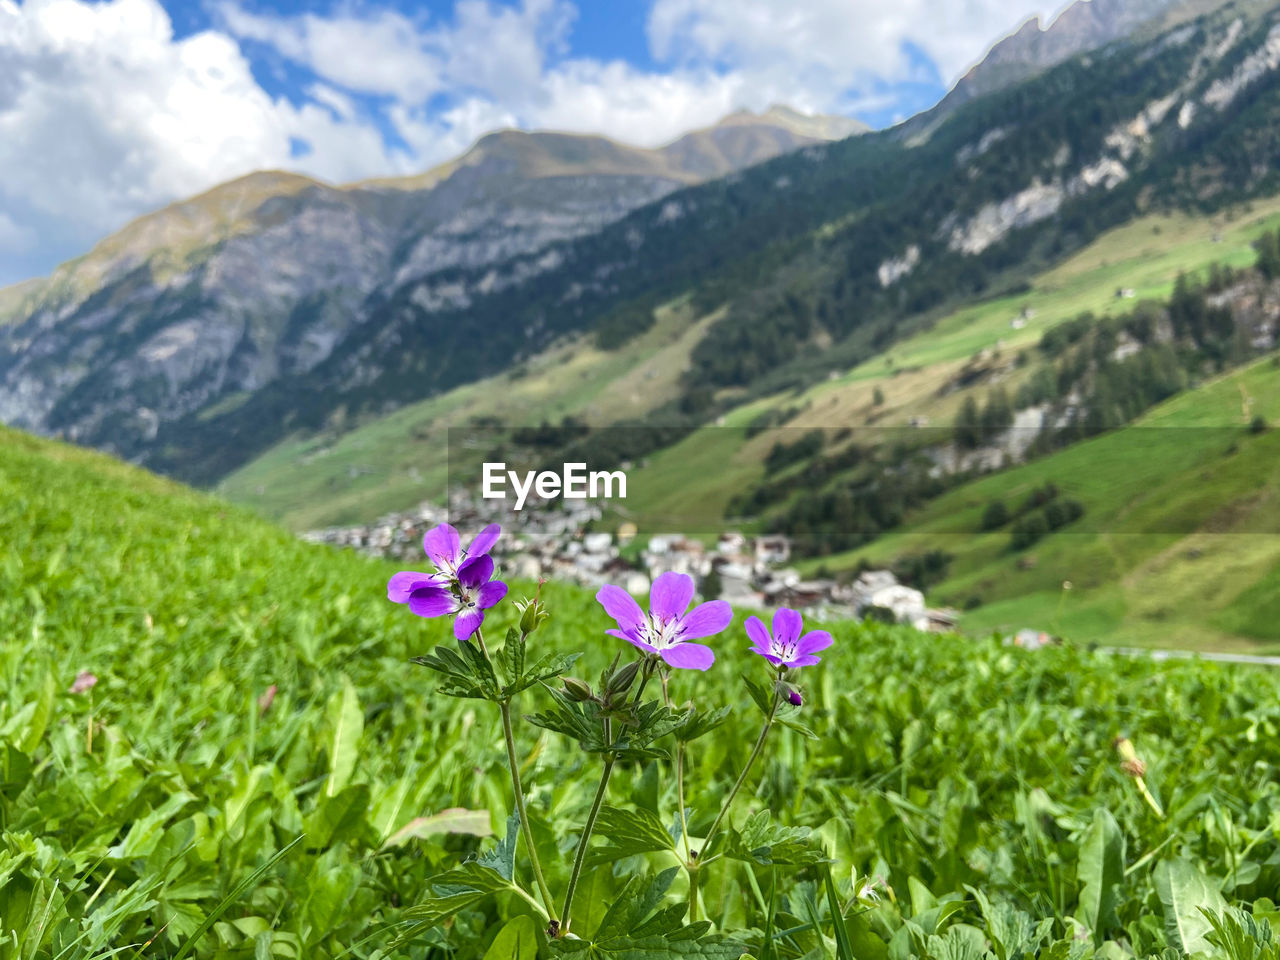 Flowers above the village of vals